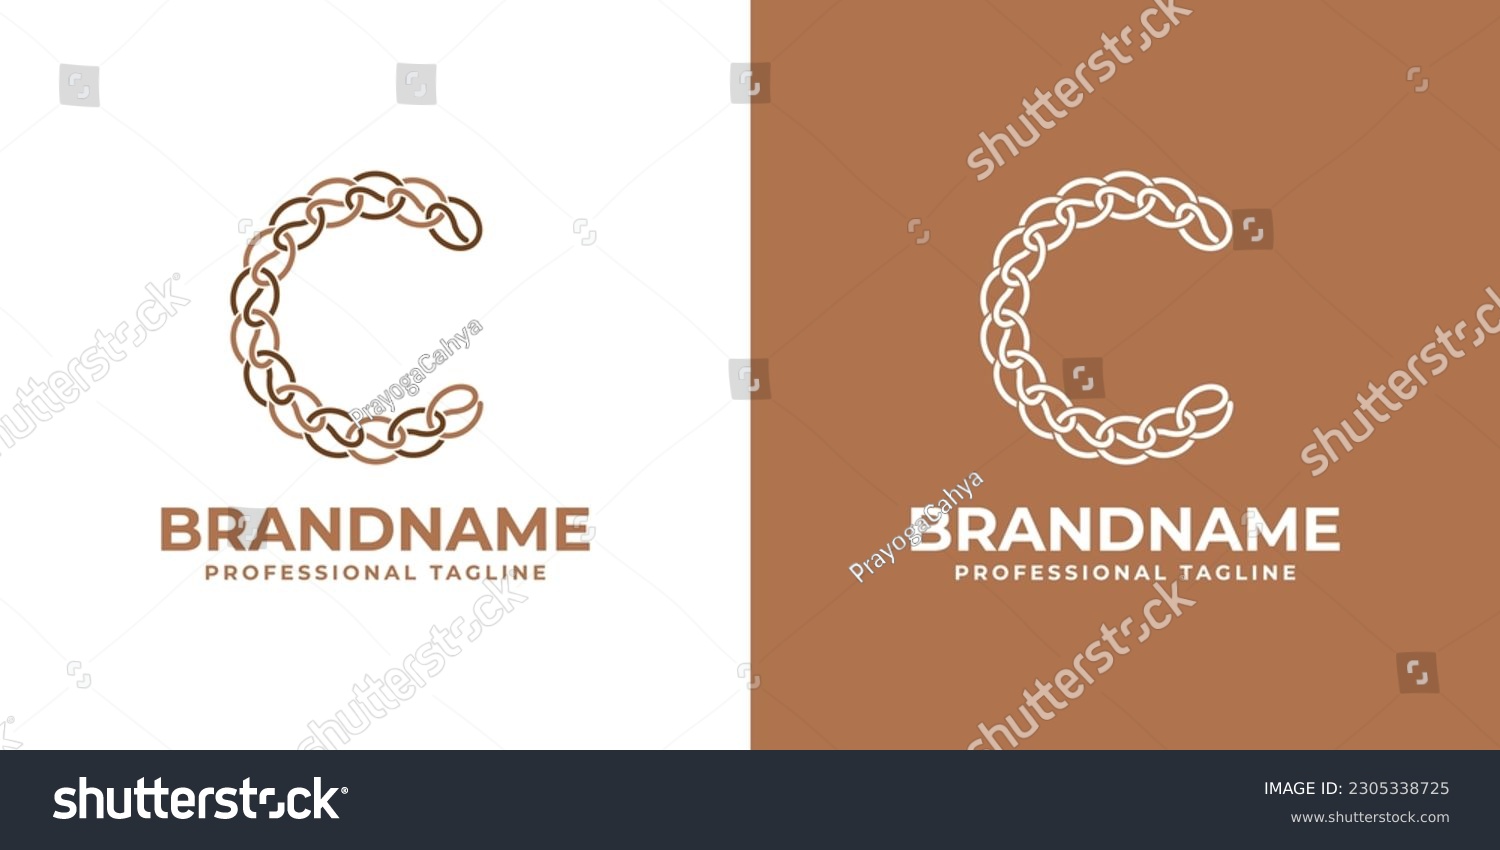 SVG of Letter C Coffee Chain Logo, suitable for any business realted to Coffee with C initials. svg